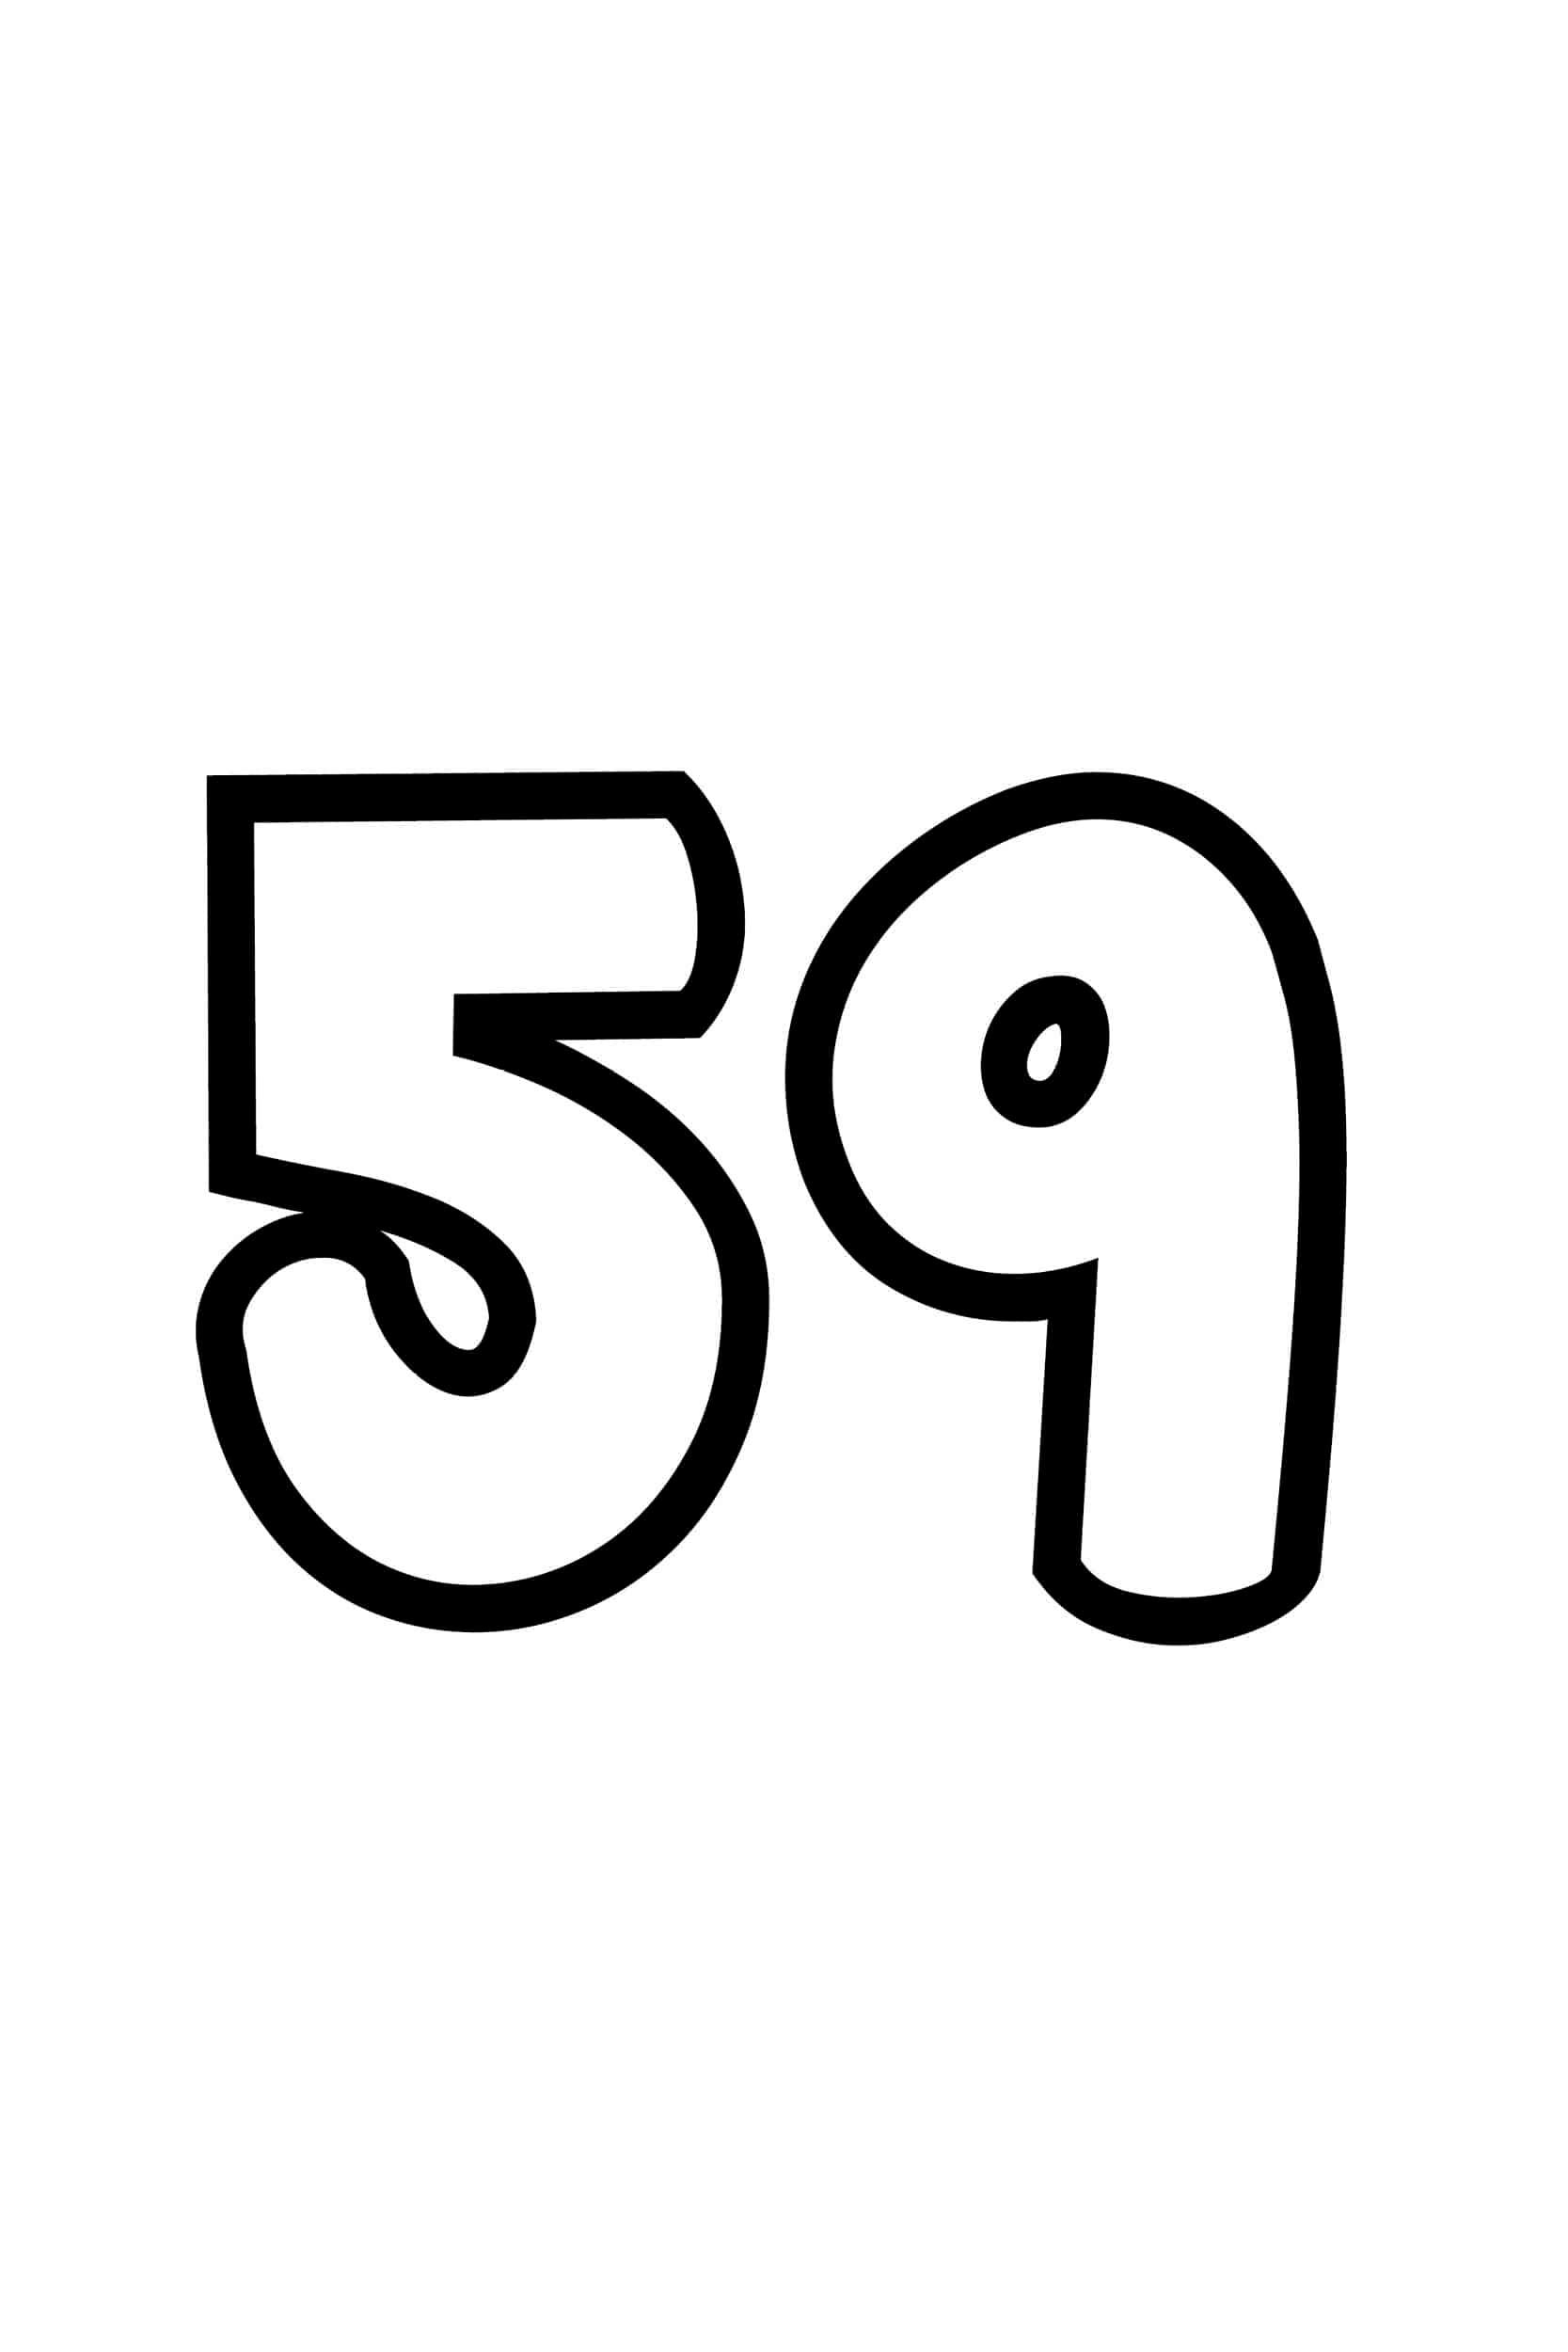 meaning of the number 59